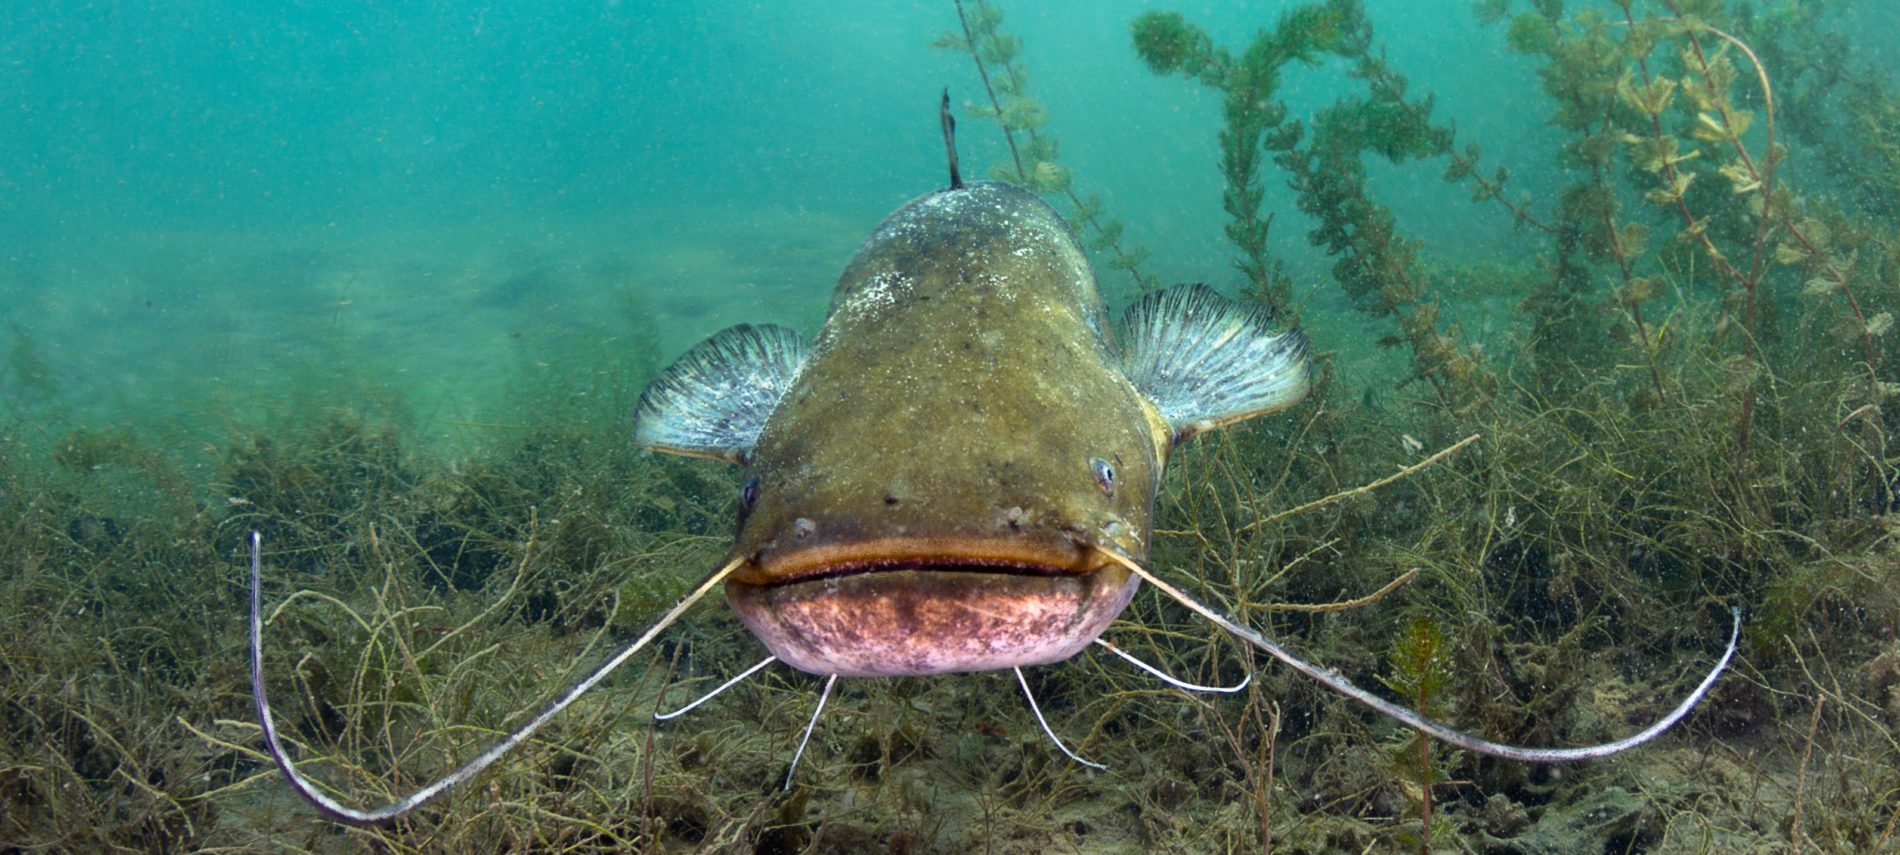 Big catfish seen underwater and looking straight into the camera